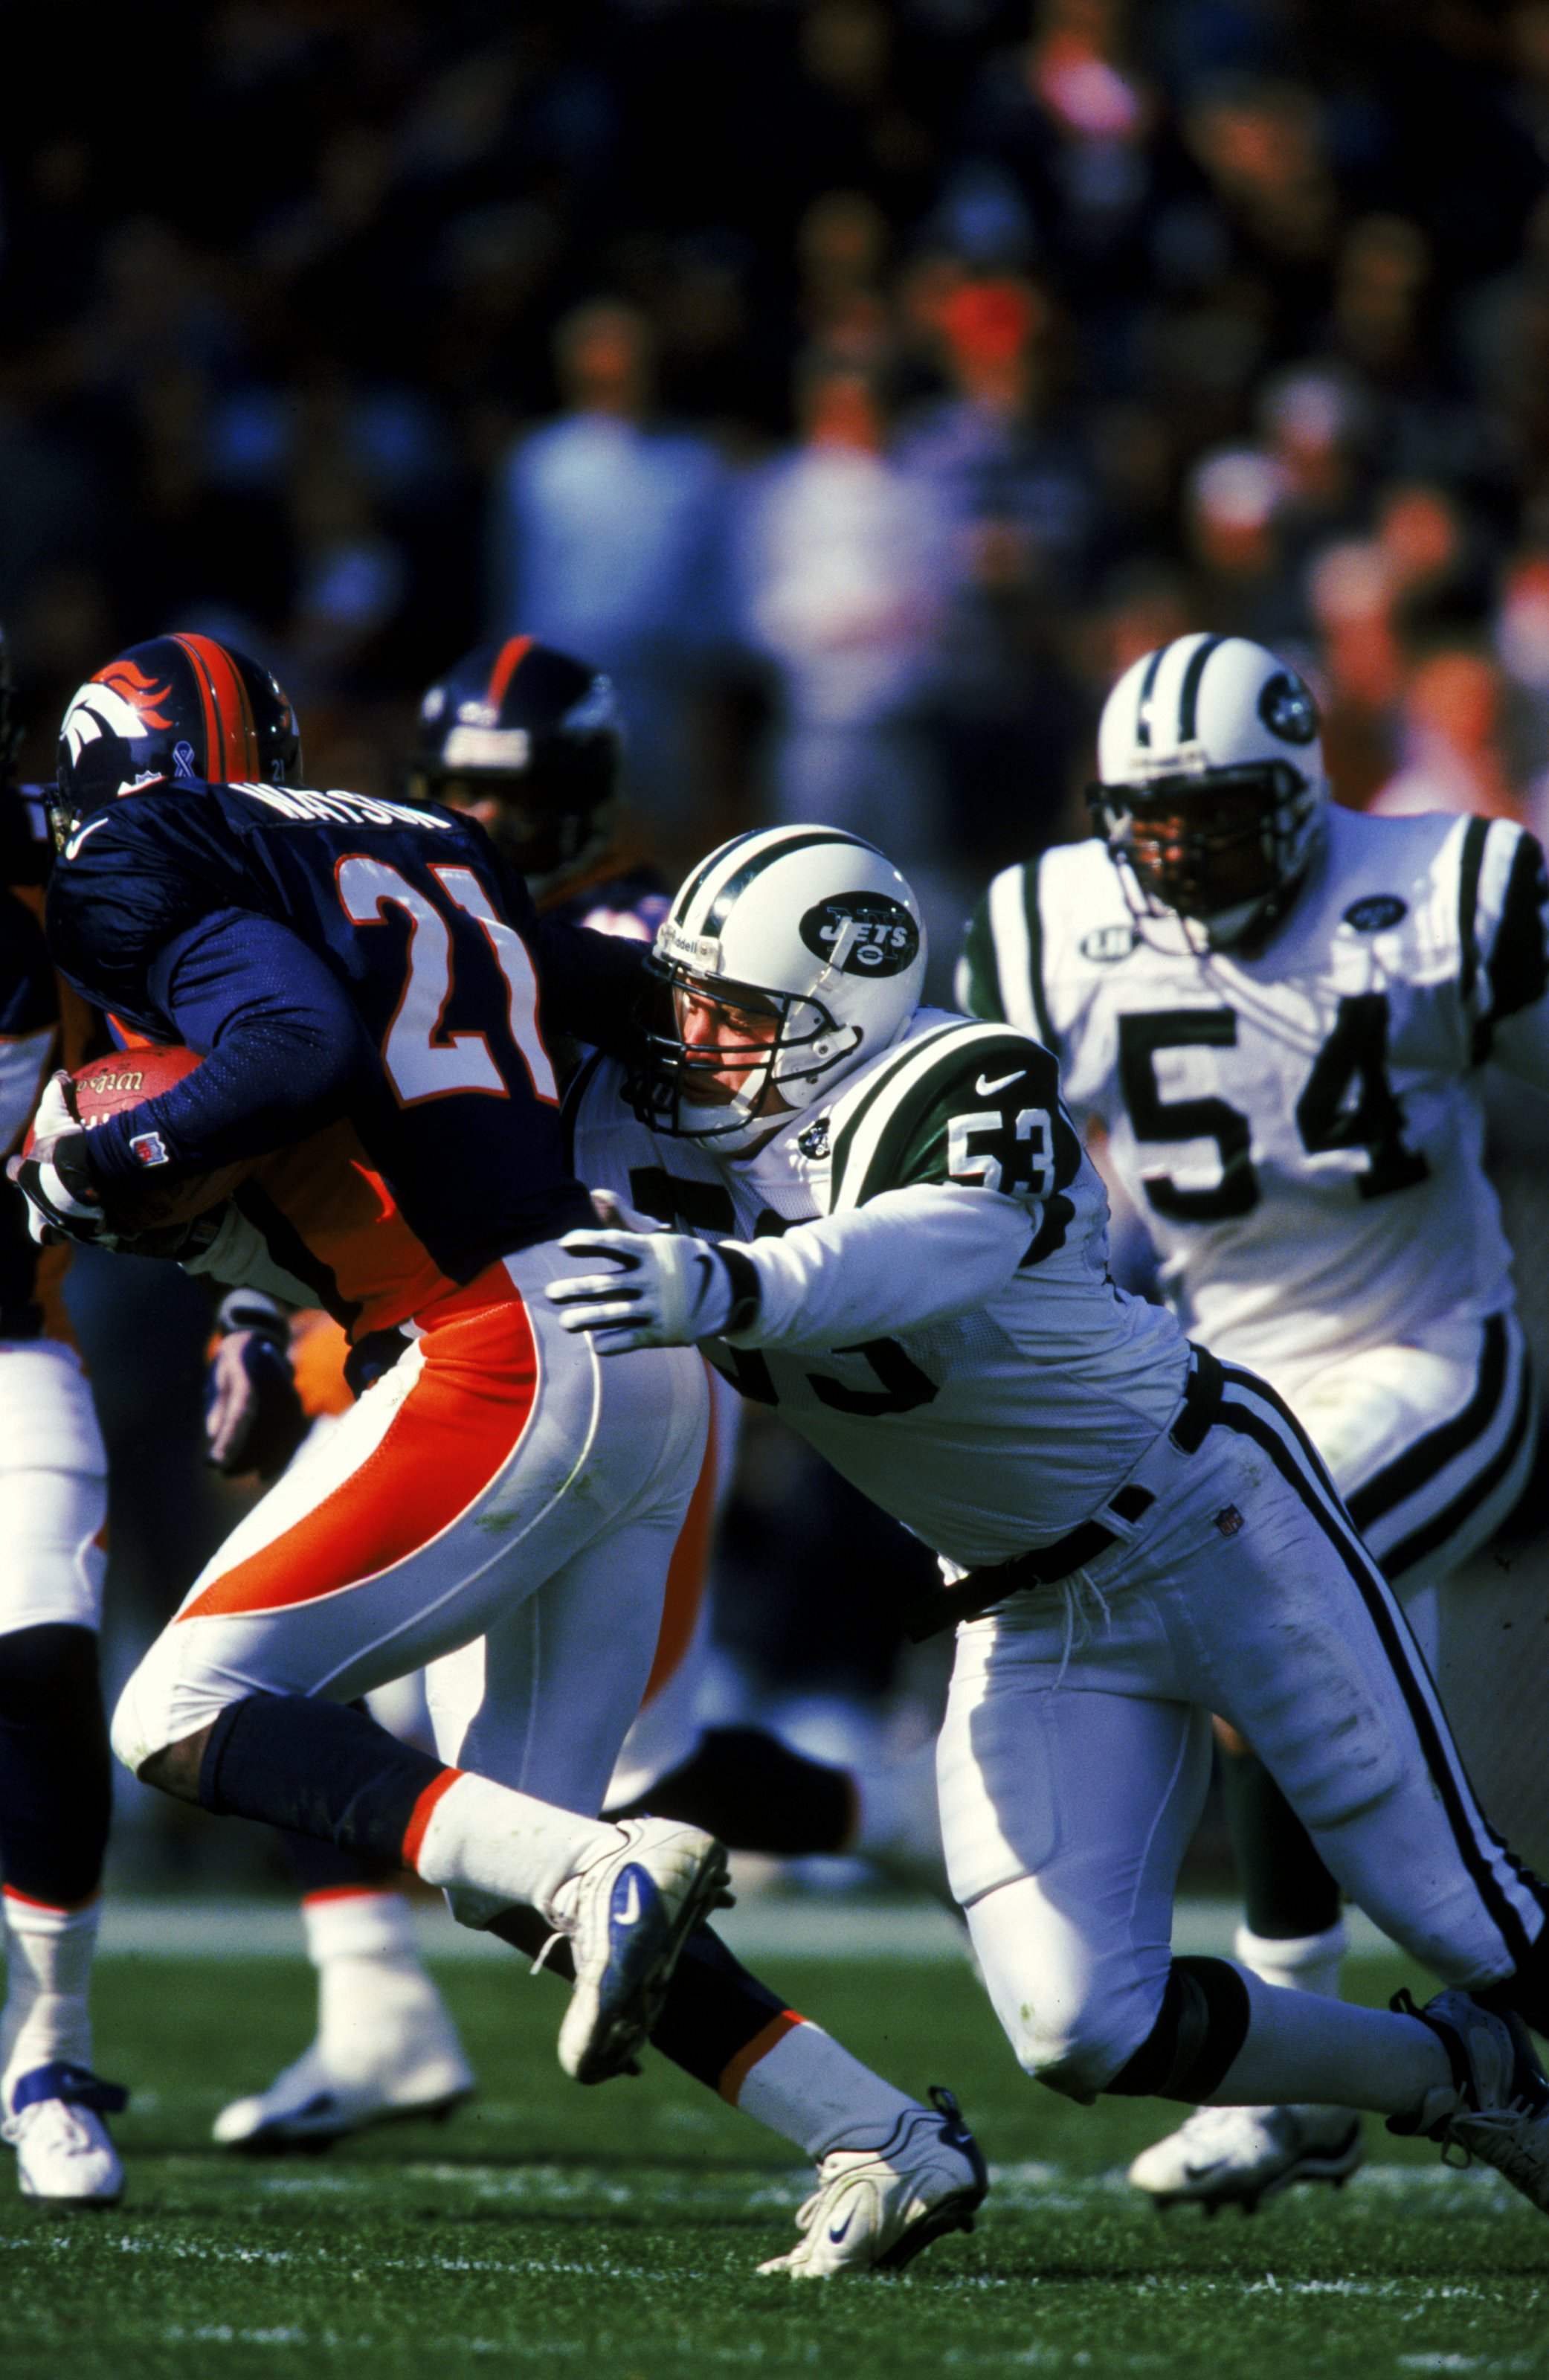 3 Oct 1999: Chad Cascadden #53 of the New York Jets tries to tackle Chris Watson #21 of the Denver Broncos during the game at the Mile High Stadium in Denver, Colorado. The Jets defeated the Broncos 21-13.